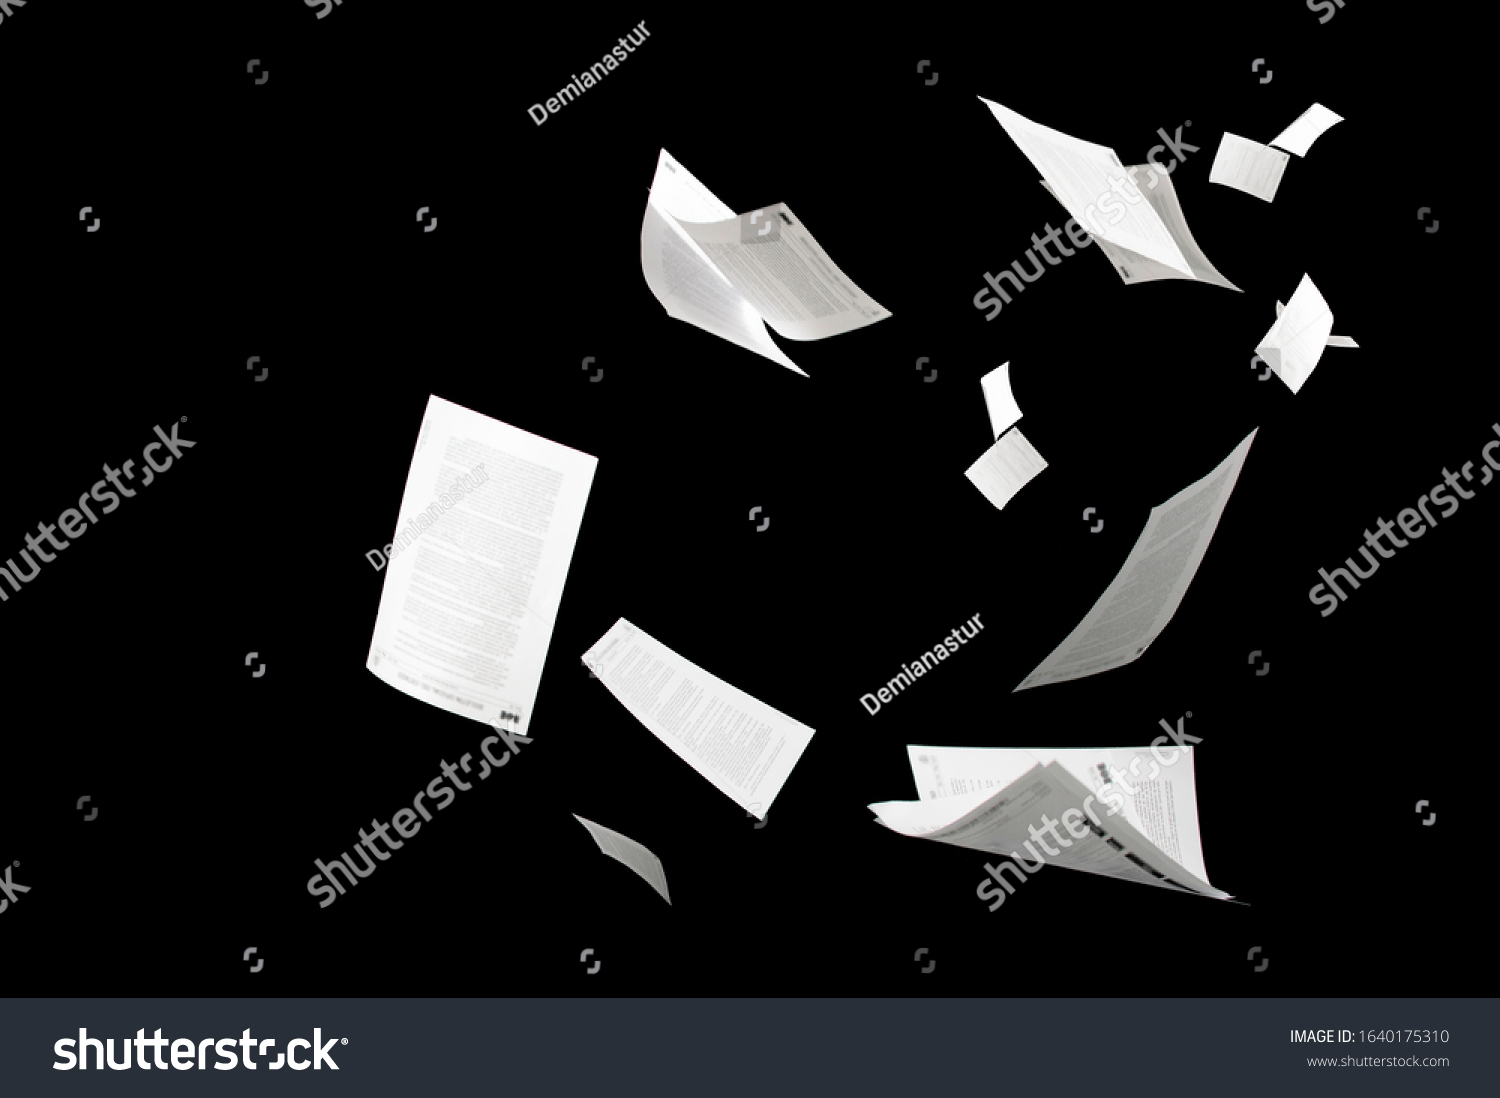 Many flying business documents isolated on black background Papers flying in air in business concept #1640175310